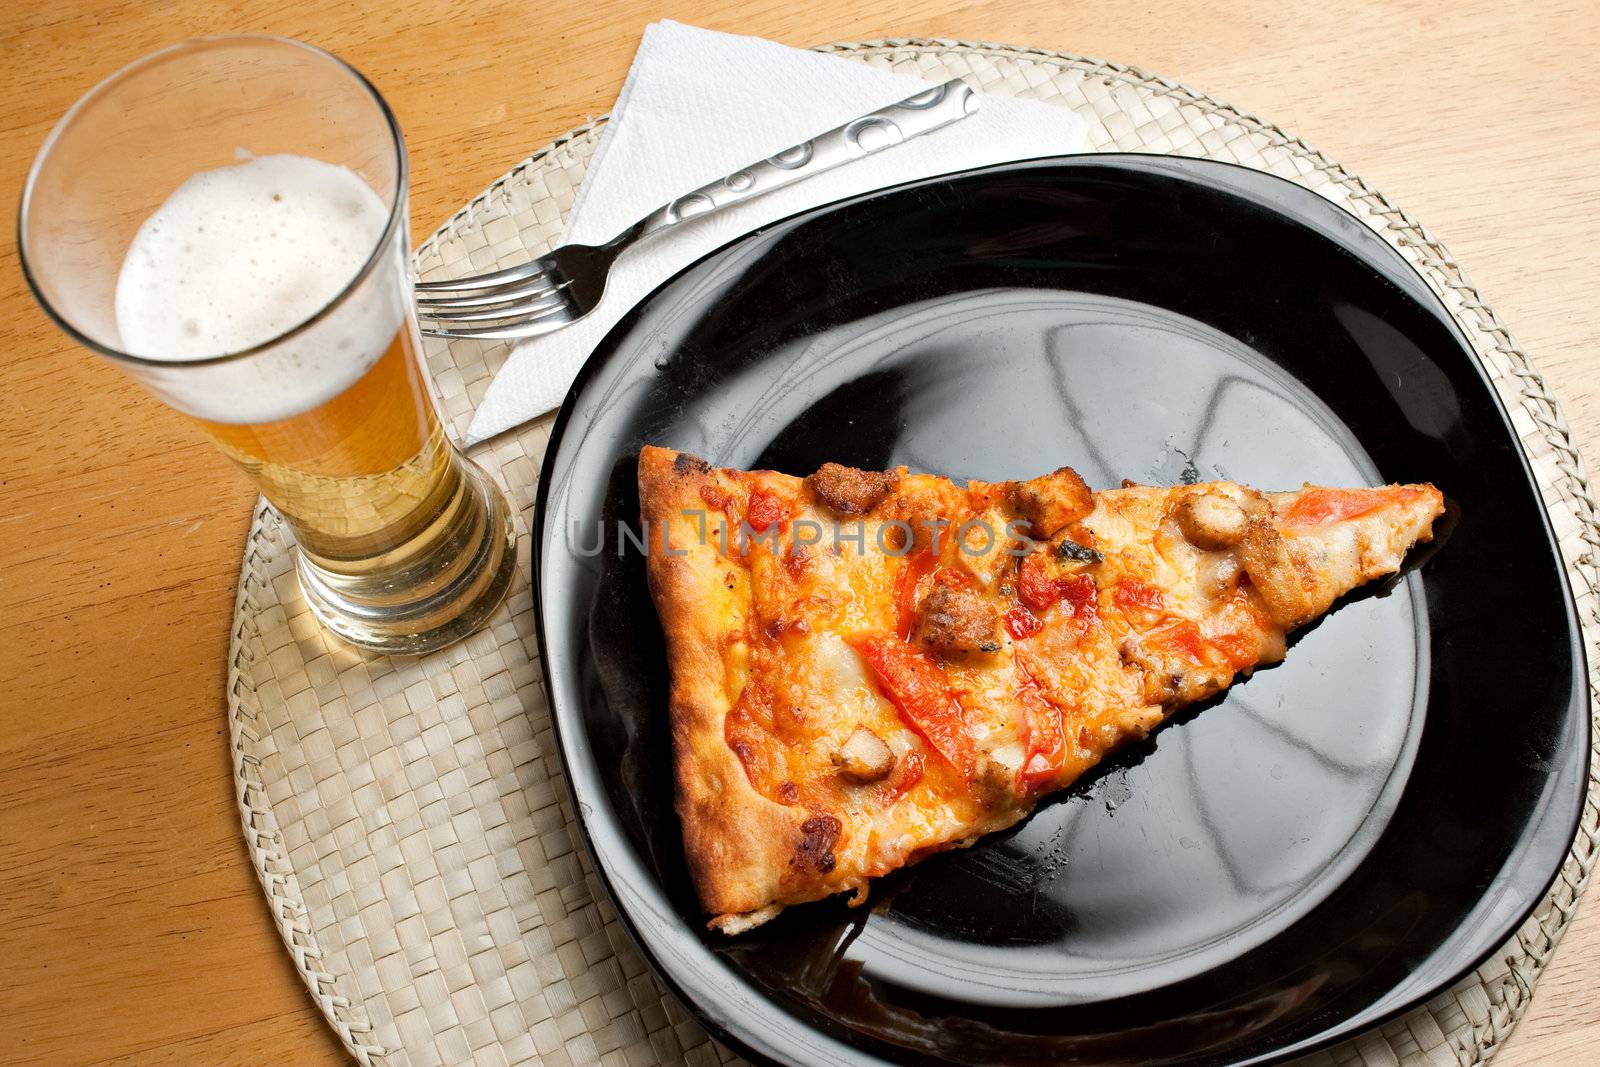 A single slice of buffalo chicken pizza and a glass of golden lager beer.  The perfect weekend take out dinner.